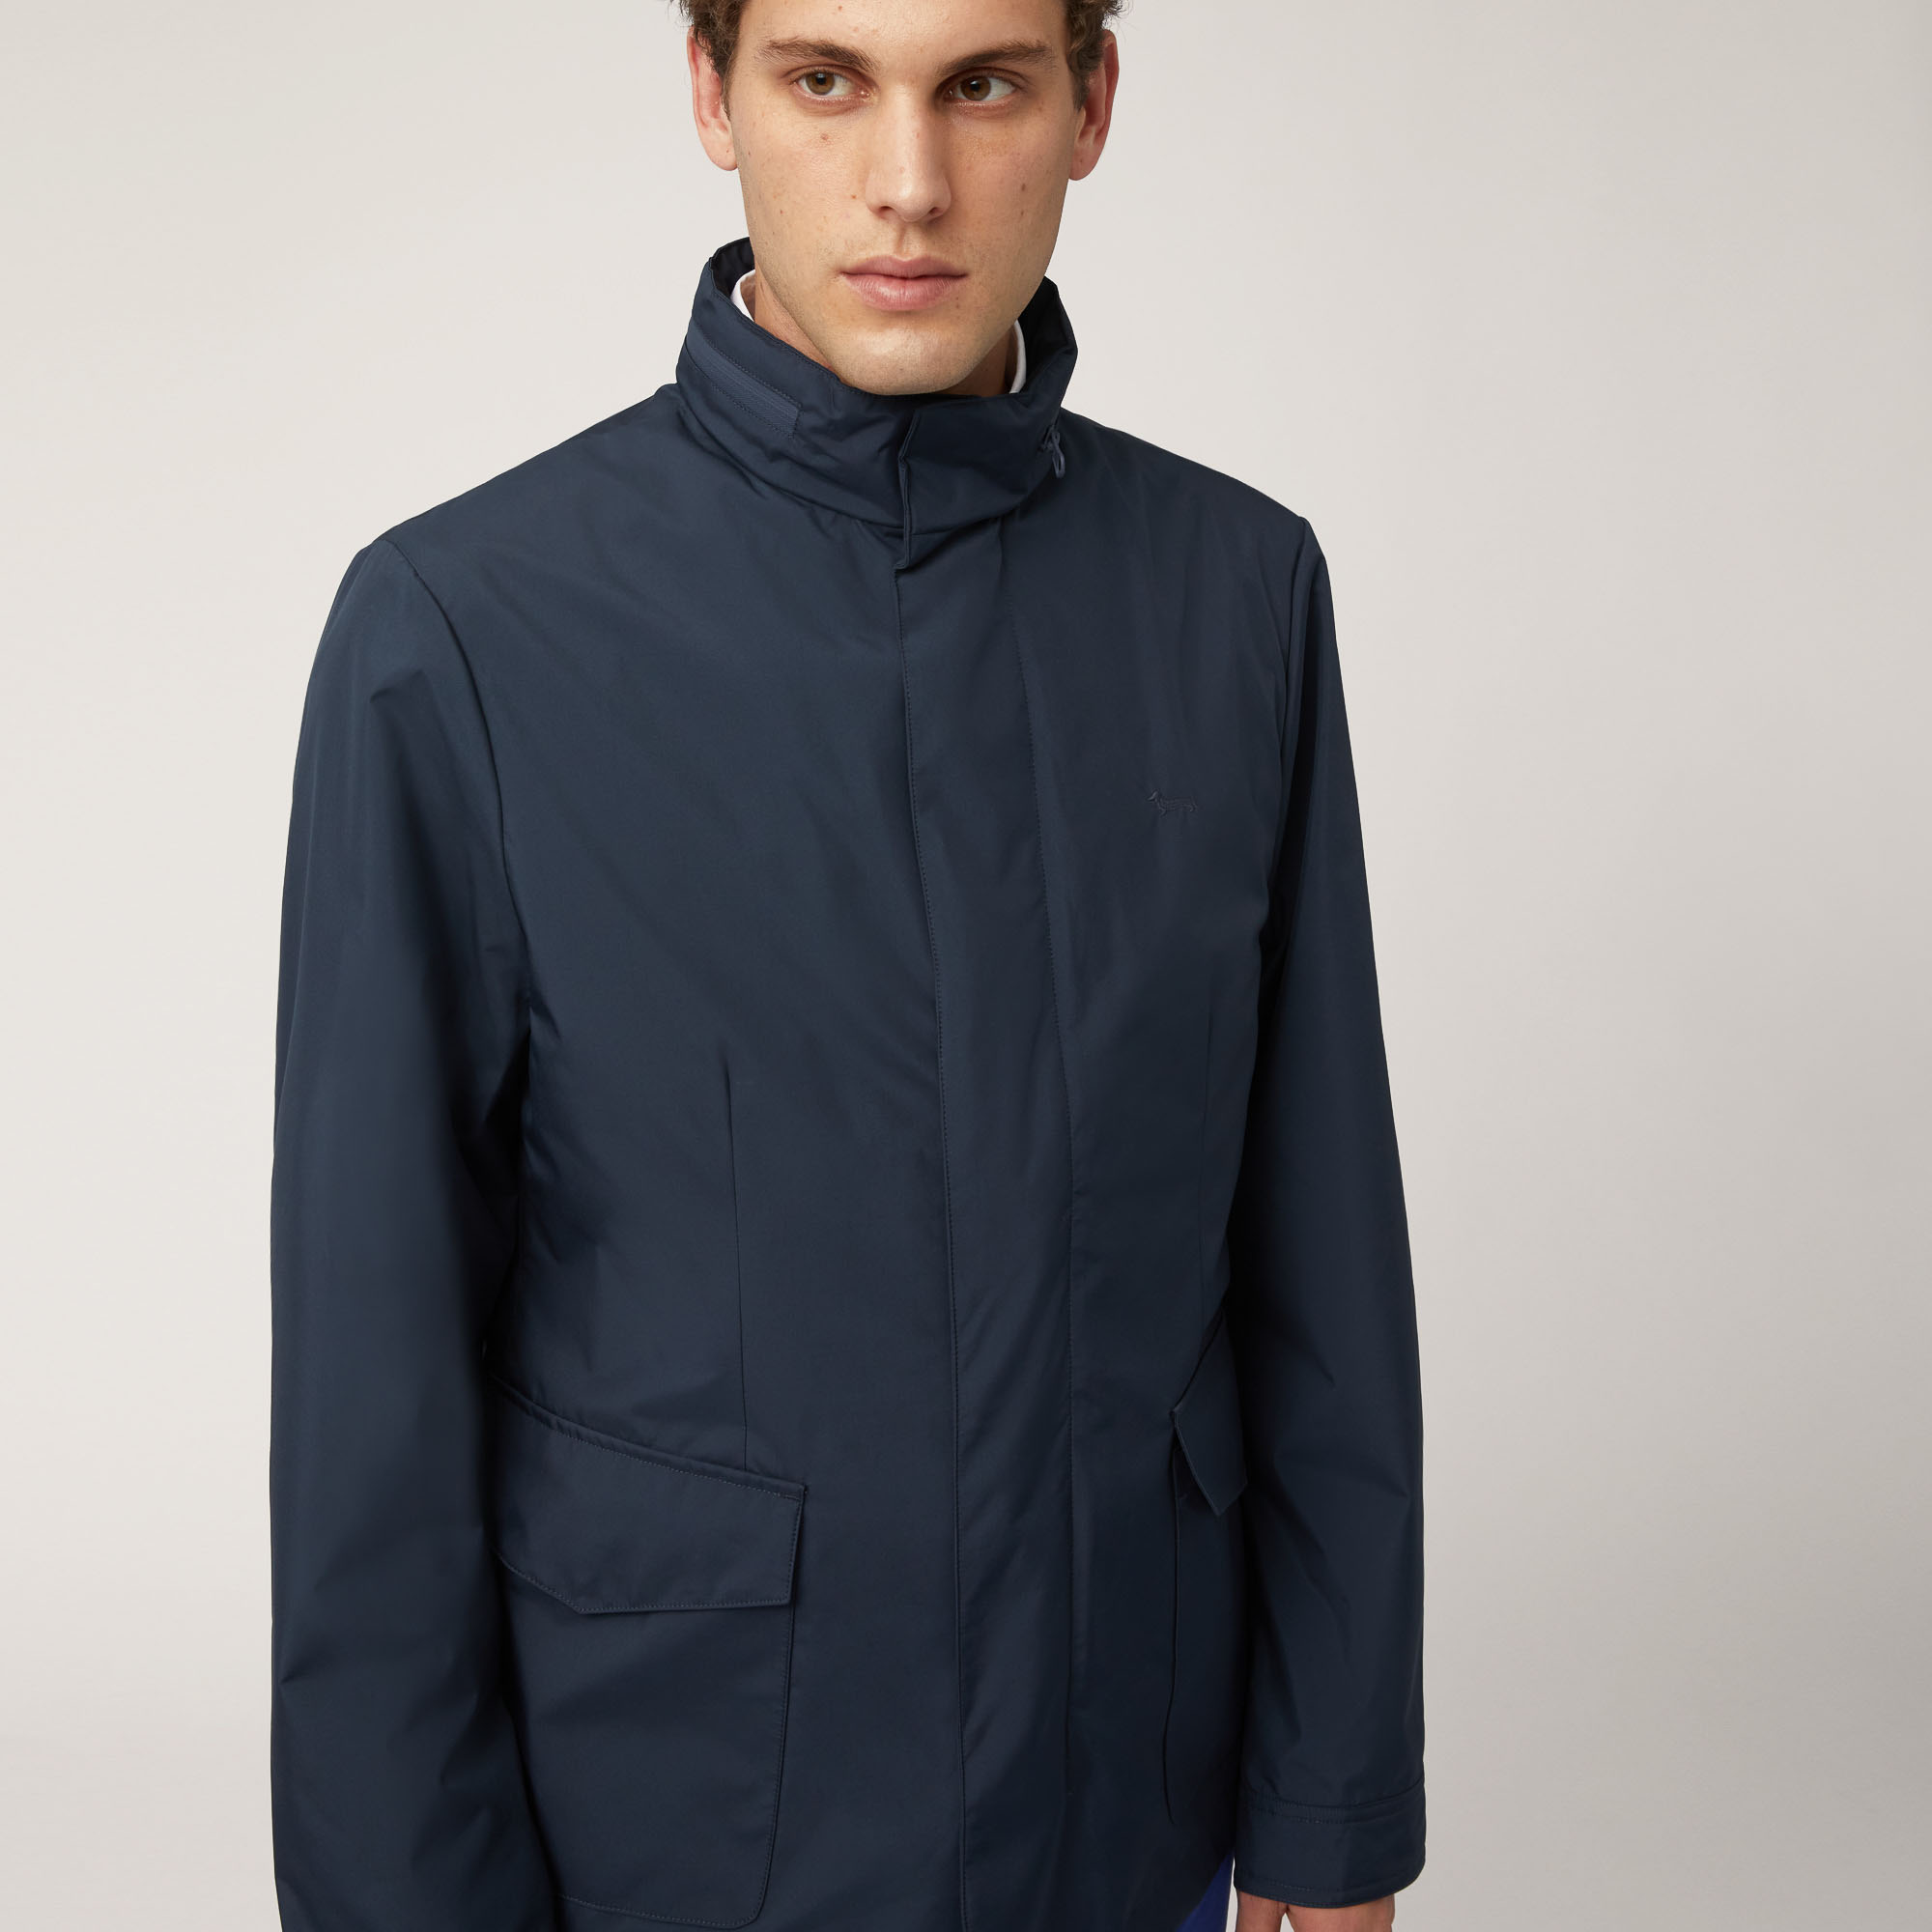 Technical Fabric Field Jacket, Blue, large image number 2